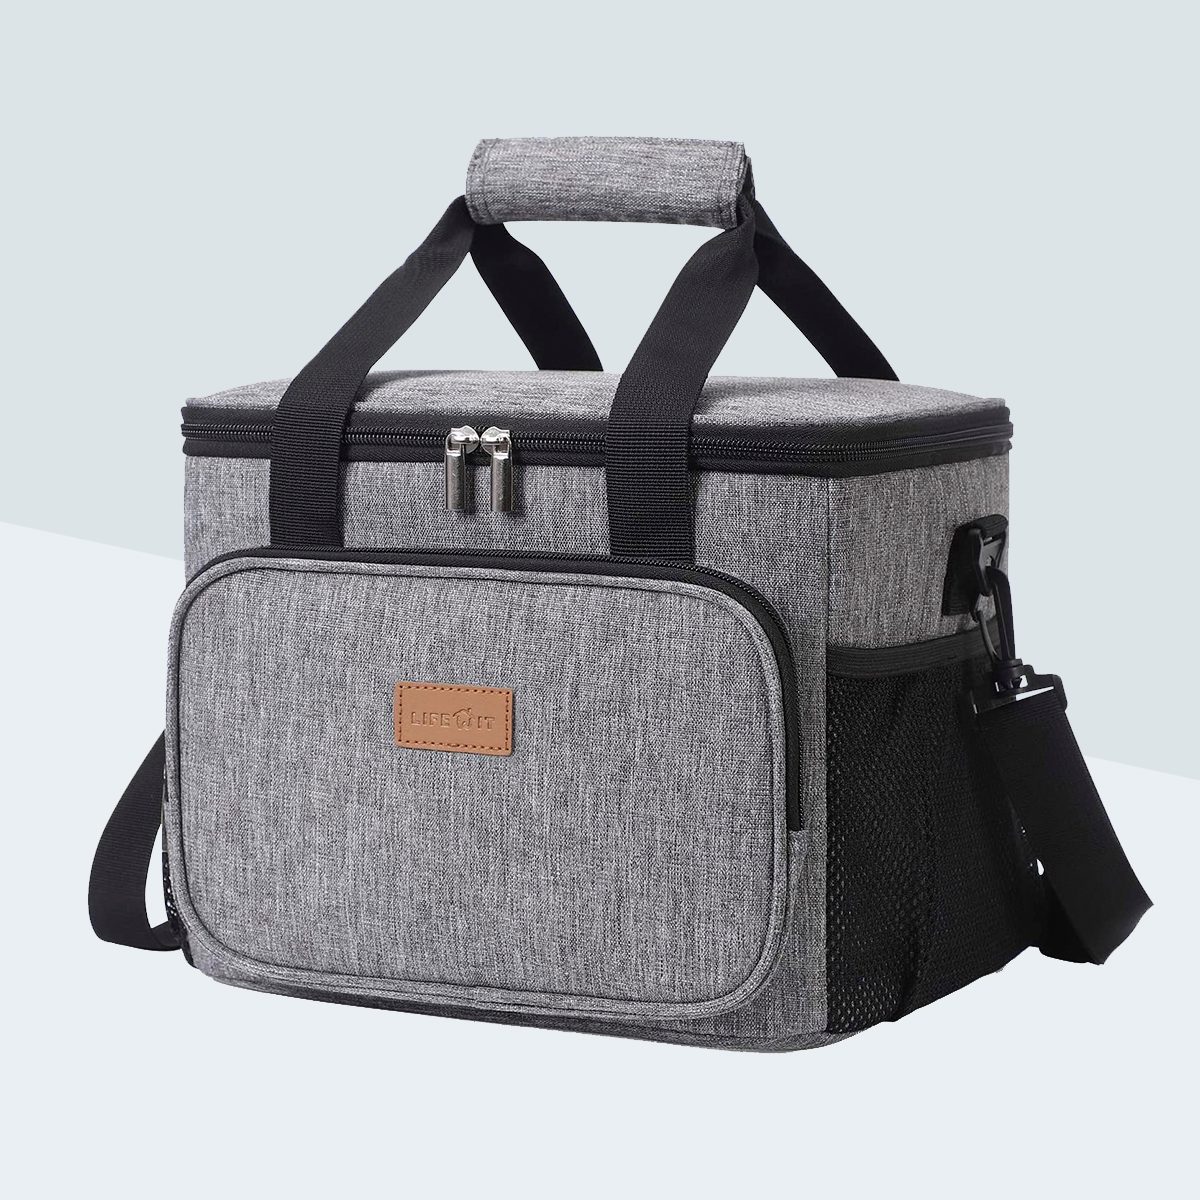 PuTwo Lunch Box Thermal Lunch Bag for Women Insulated Lunch Bag Lunch Cooler Zipper Bag Tweed Grey